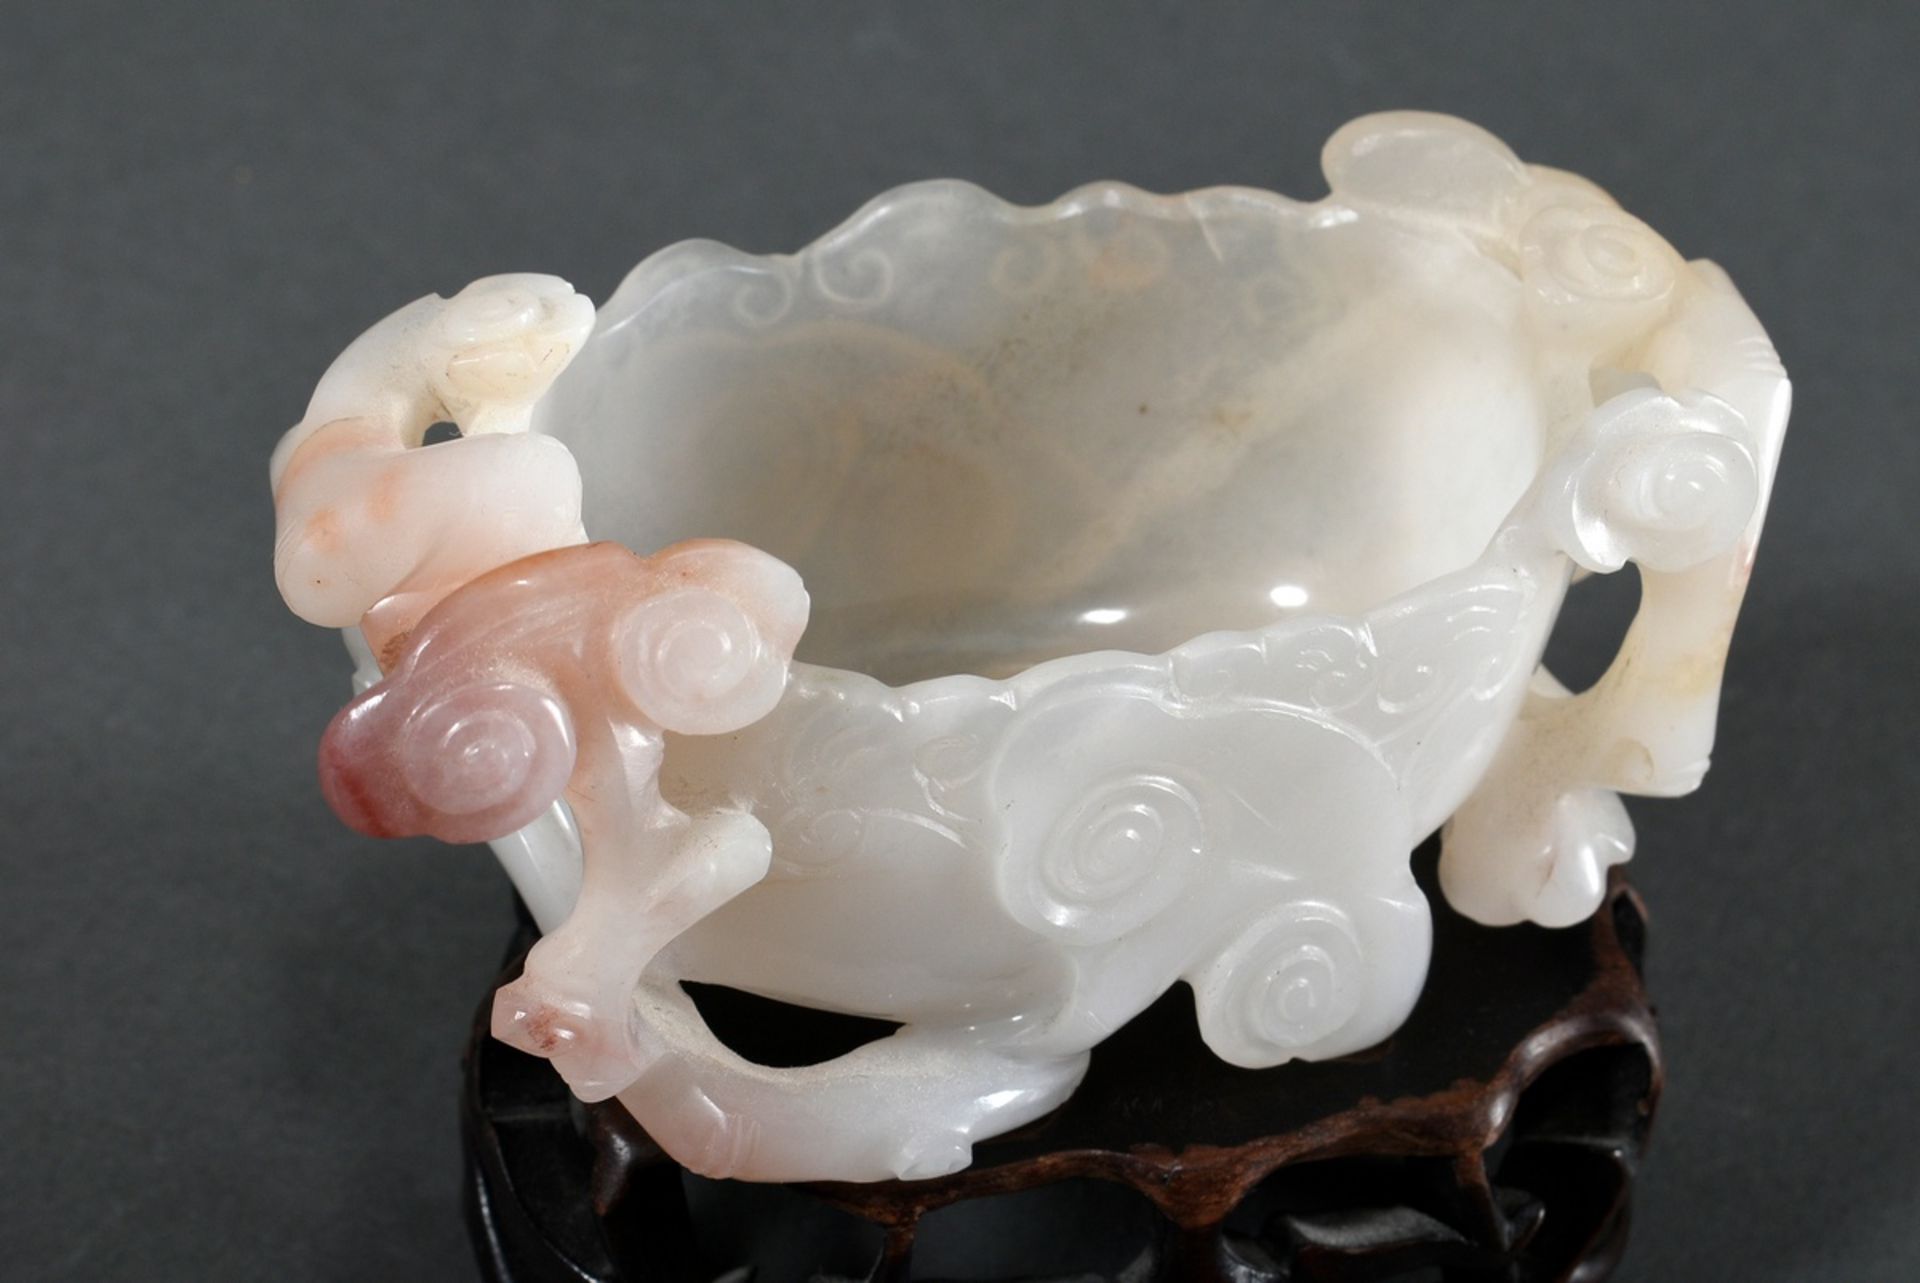 Light rose coloured jade brush washer with "Lingzhi mushrooms" on carved wooden base, 4,5x10x5cm, s - Image 3 of 5